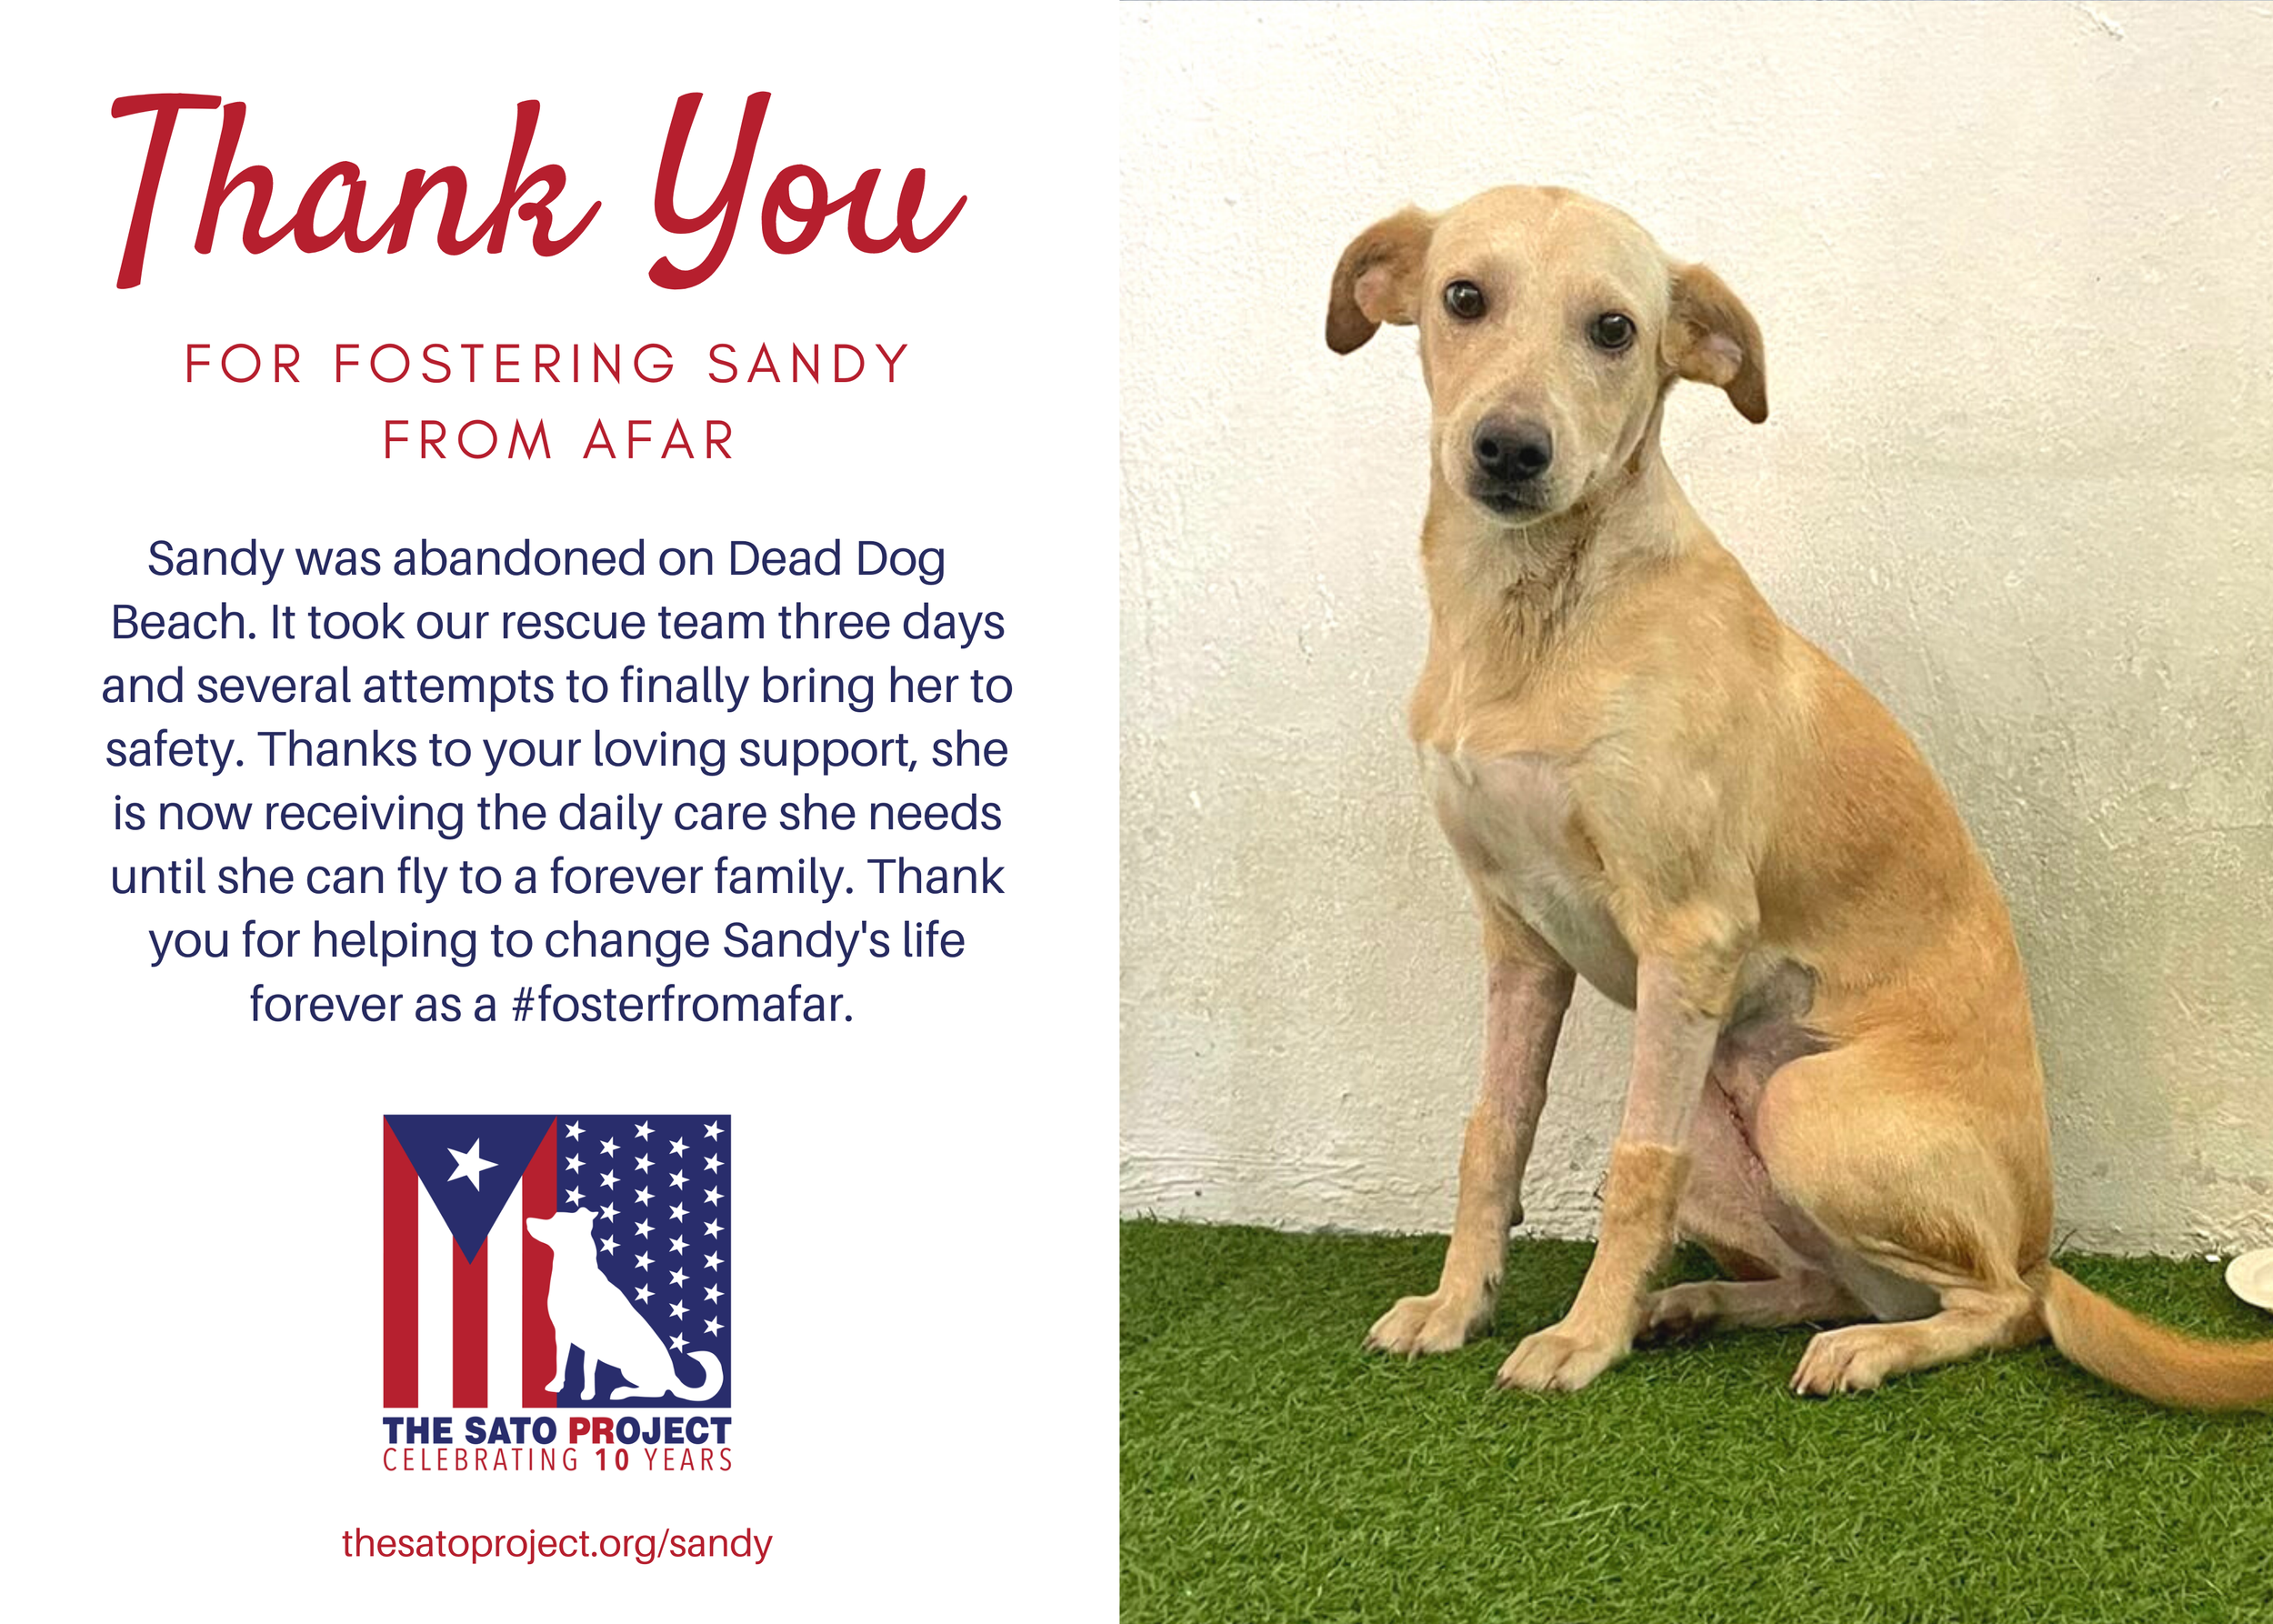 You'll receive this digital postcard to save and/or print to think of your foster dog every day.